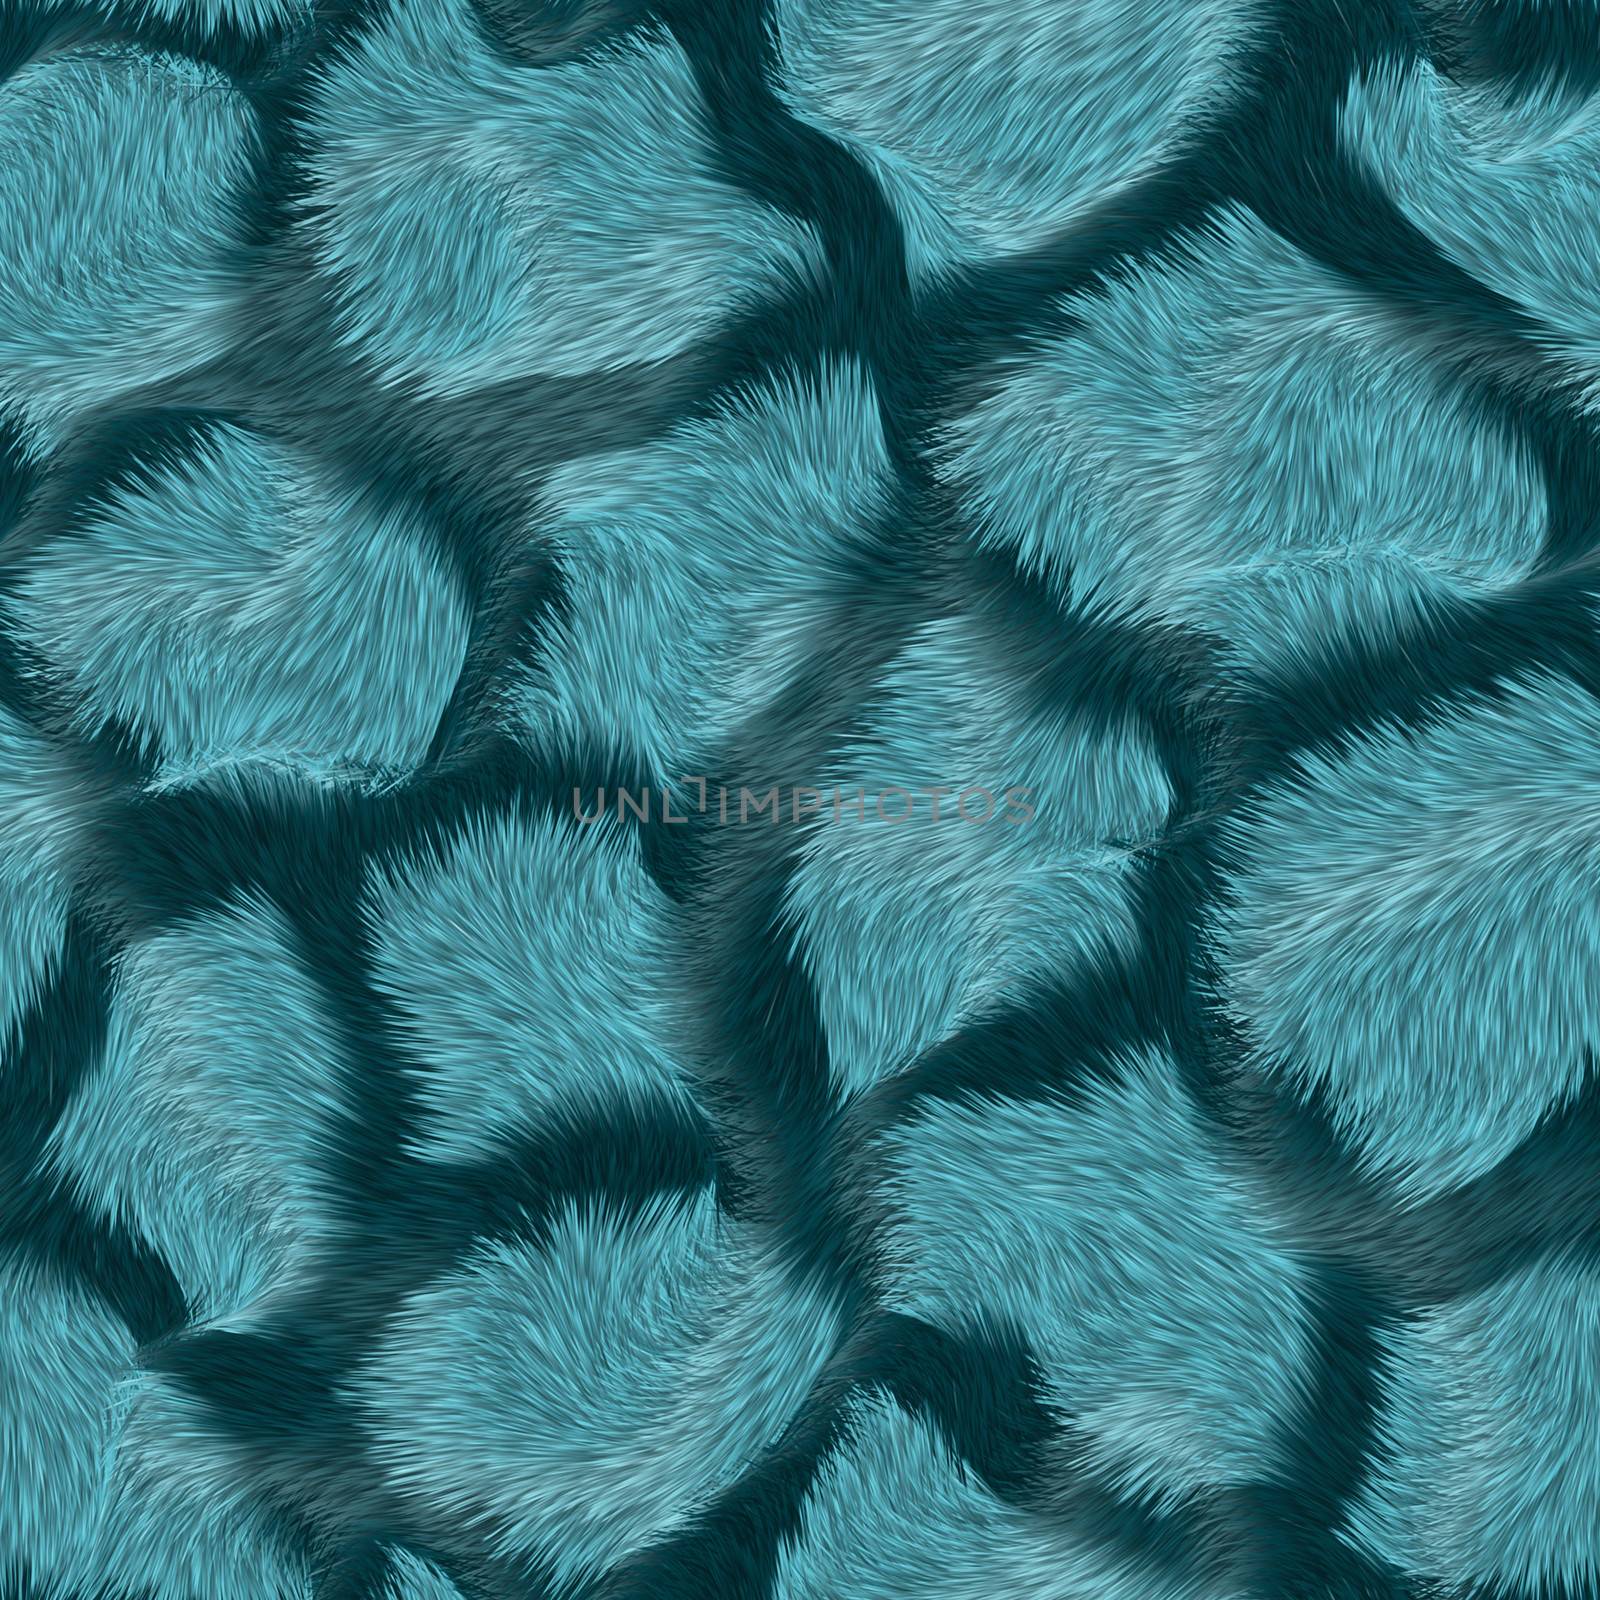 Synthetic fur for background usage by sfinks